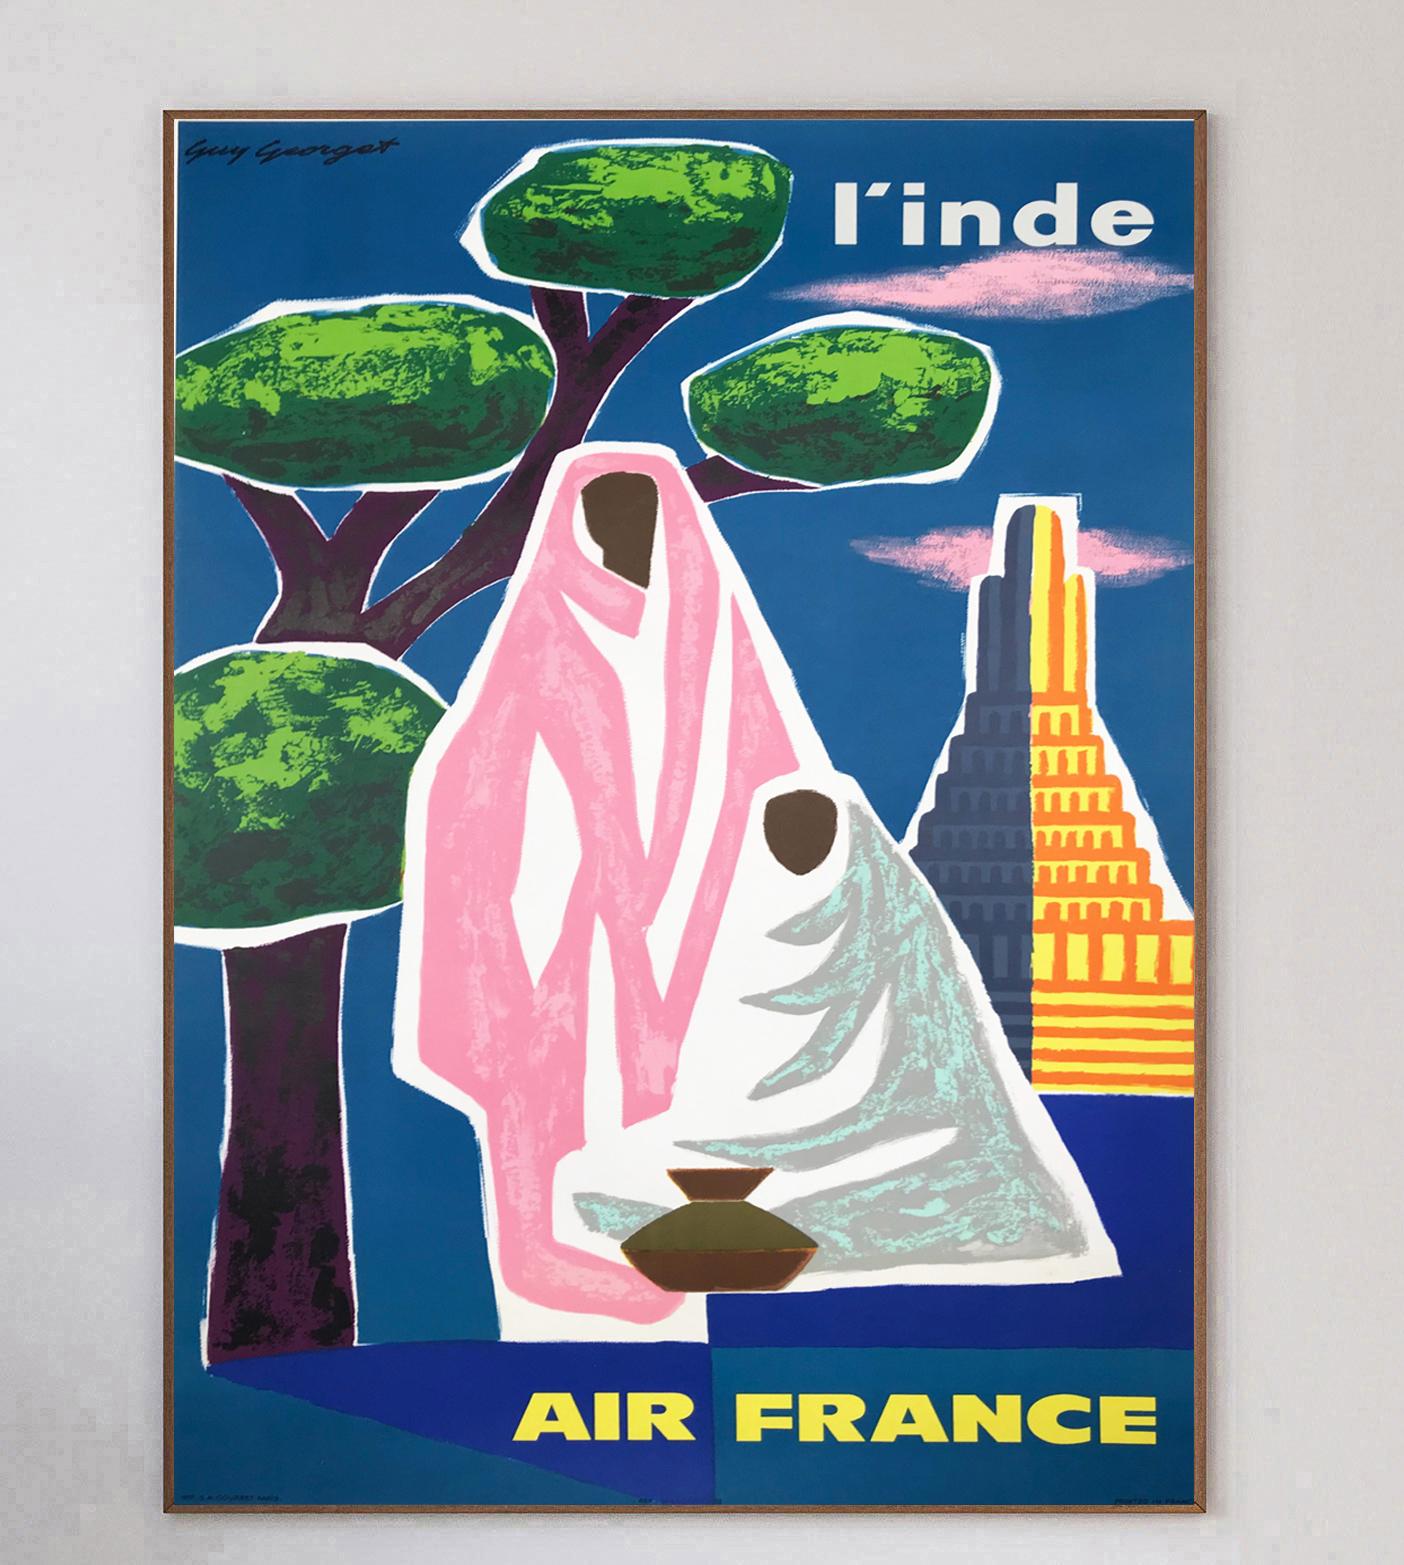 With fabulous artwork from French artist Guy Georget who worked on many Air France posters of the era, this poster promoting the airlines routes to India was created in 1963. Air France was created in 1933 after a merger of multiple French airlines